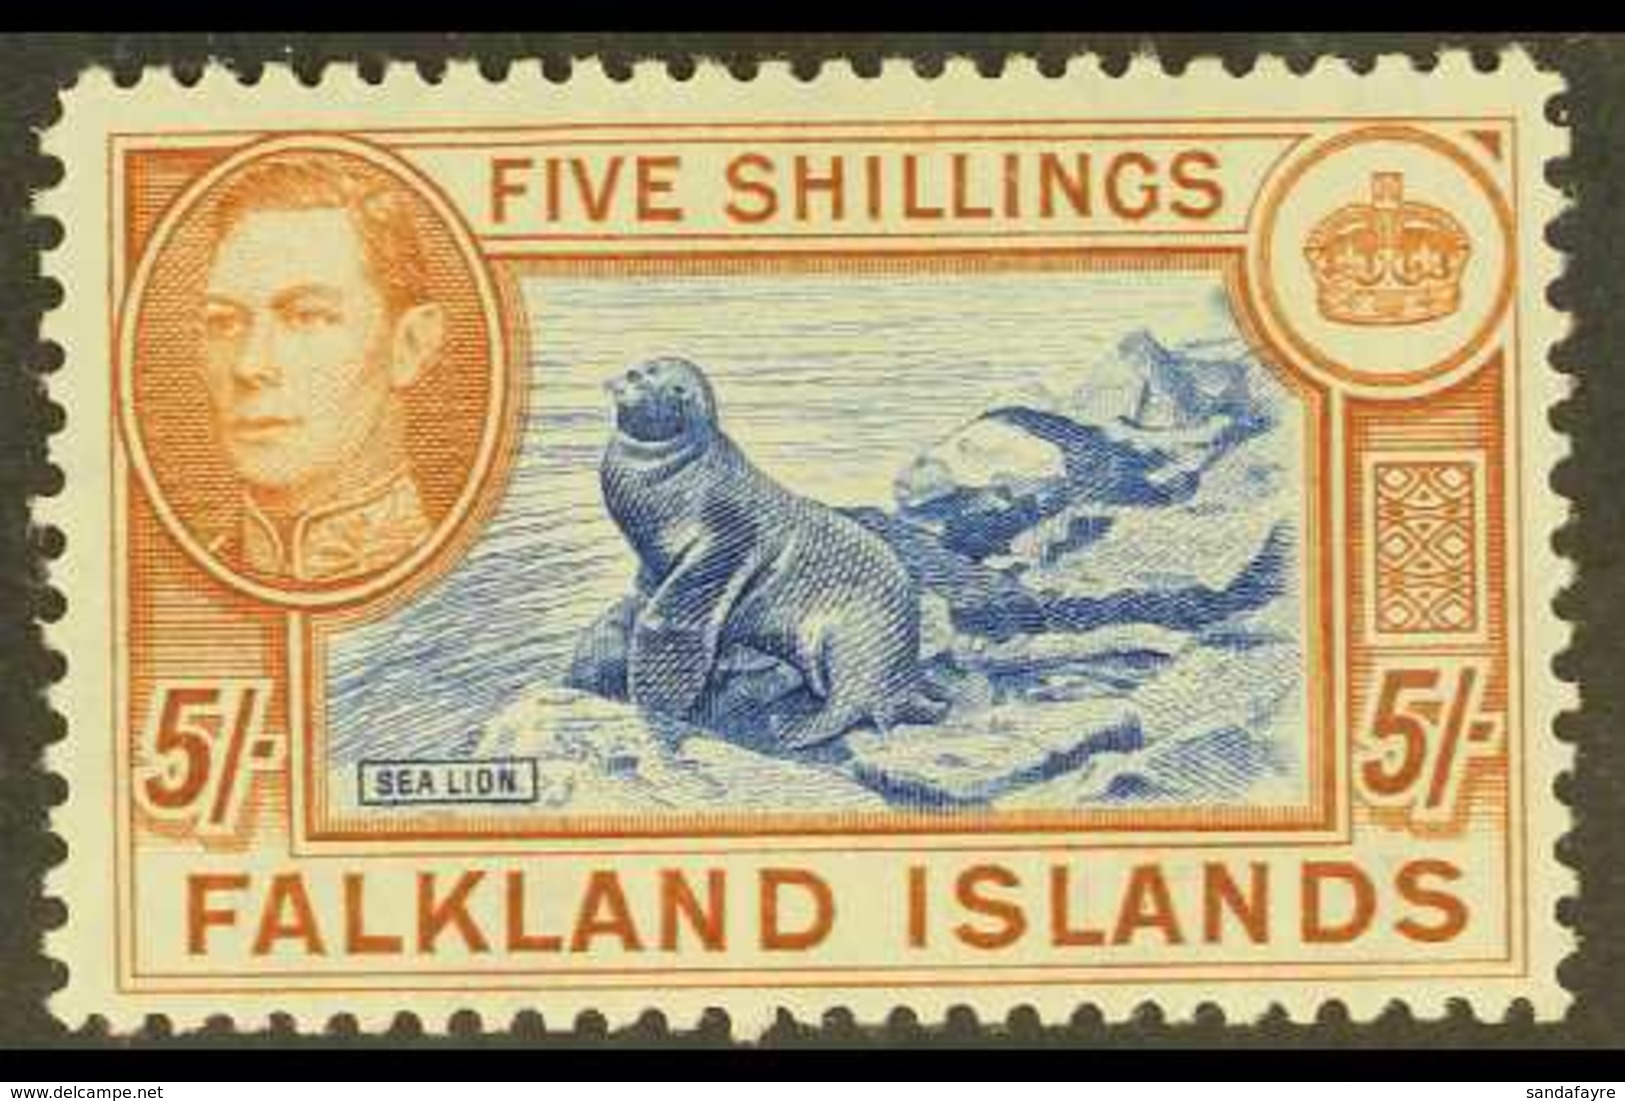 1938-50 KGVI Definitive 5s Steel Blue And Buff-brown (thin Paper), SG 161d, Never Hinged Mint. For More Images, Please V - Falklandeilanden